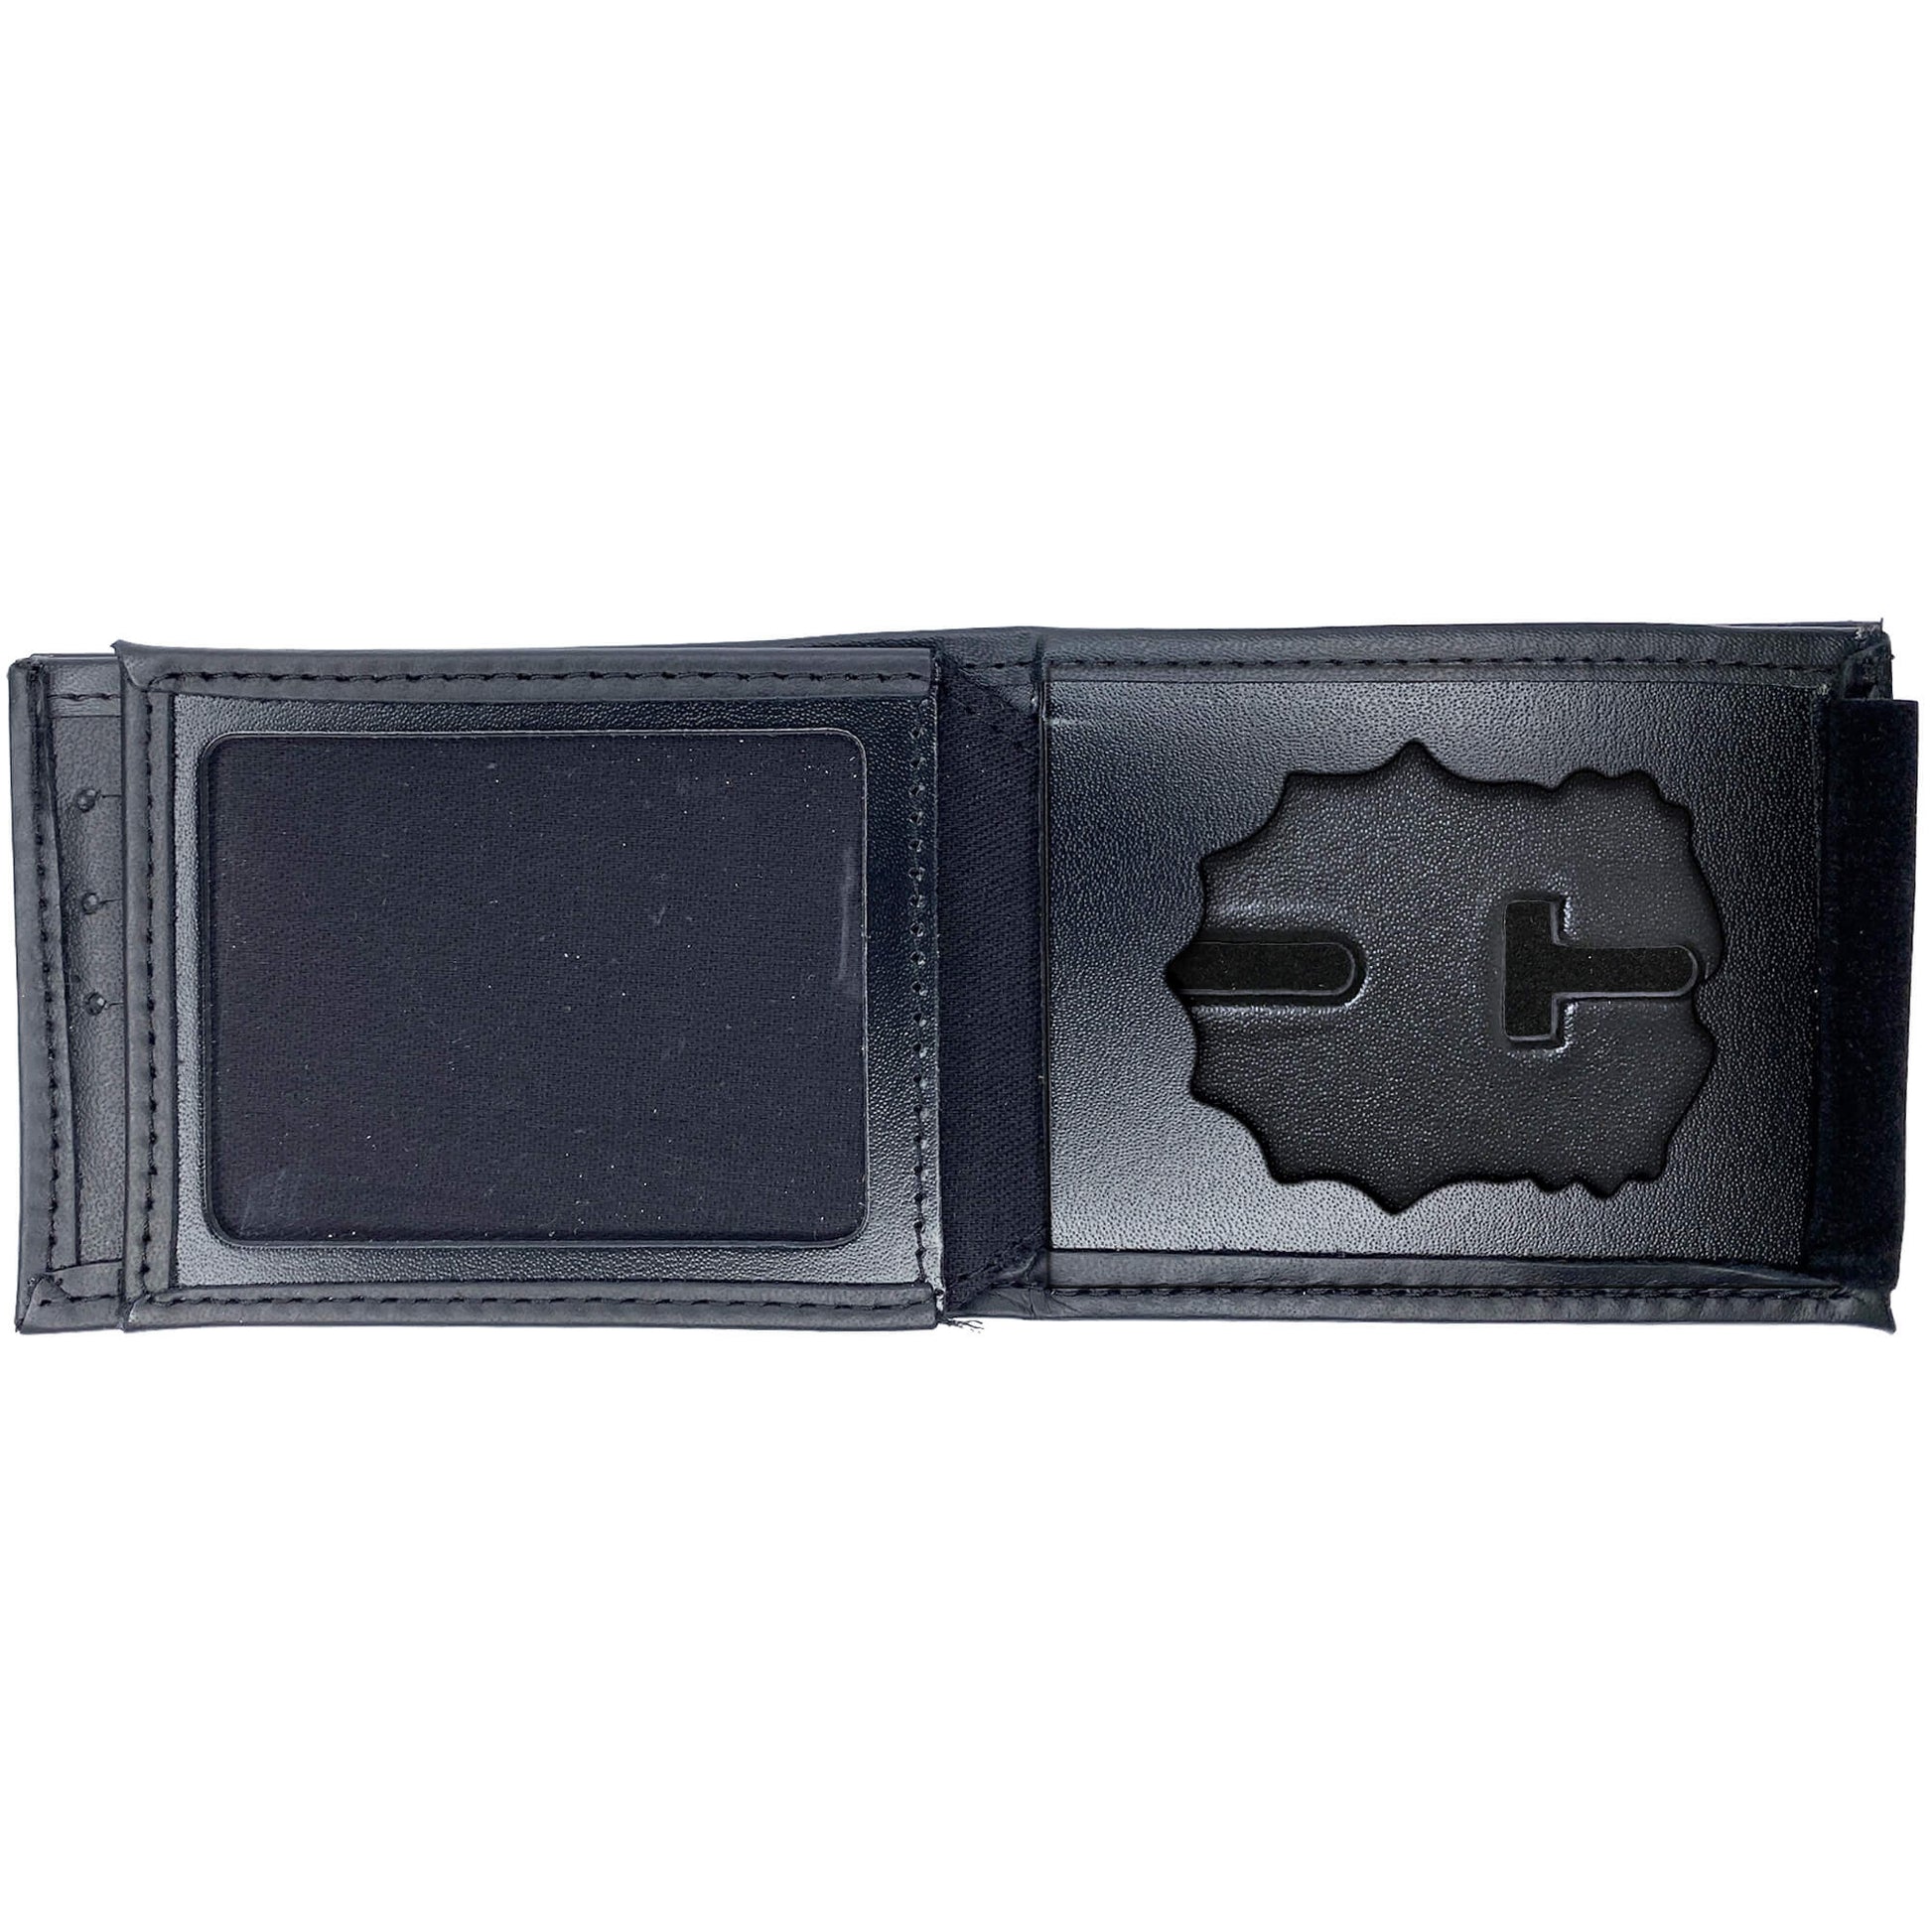 New York Police Department (NYPD) Chief-Inspector Horizontal Bifold Hidden Badge Wallet-Perfect Fit-911 Duty Gear USA